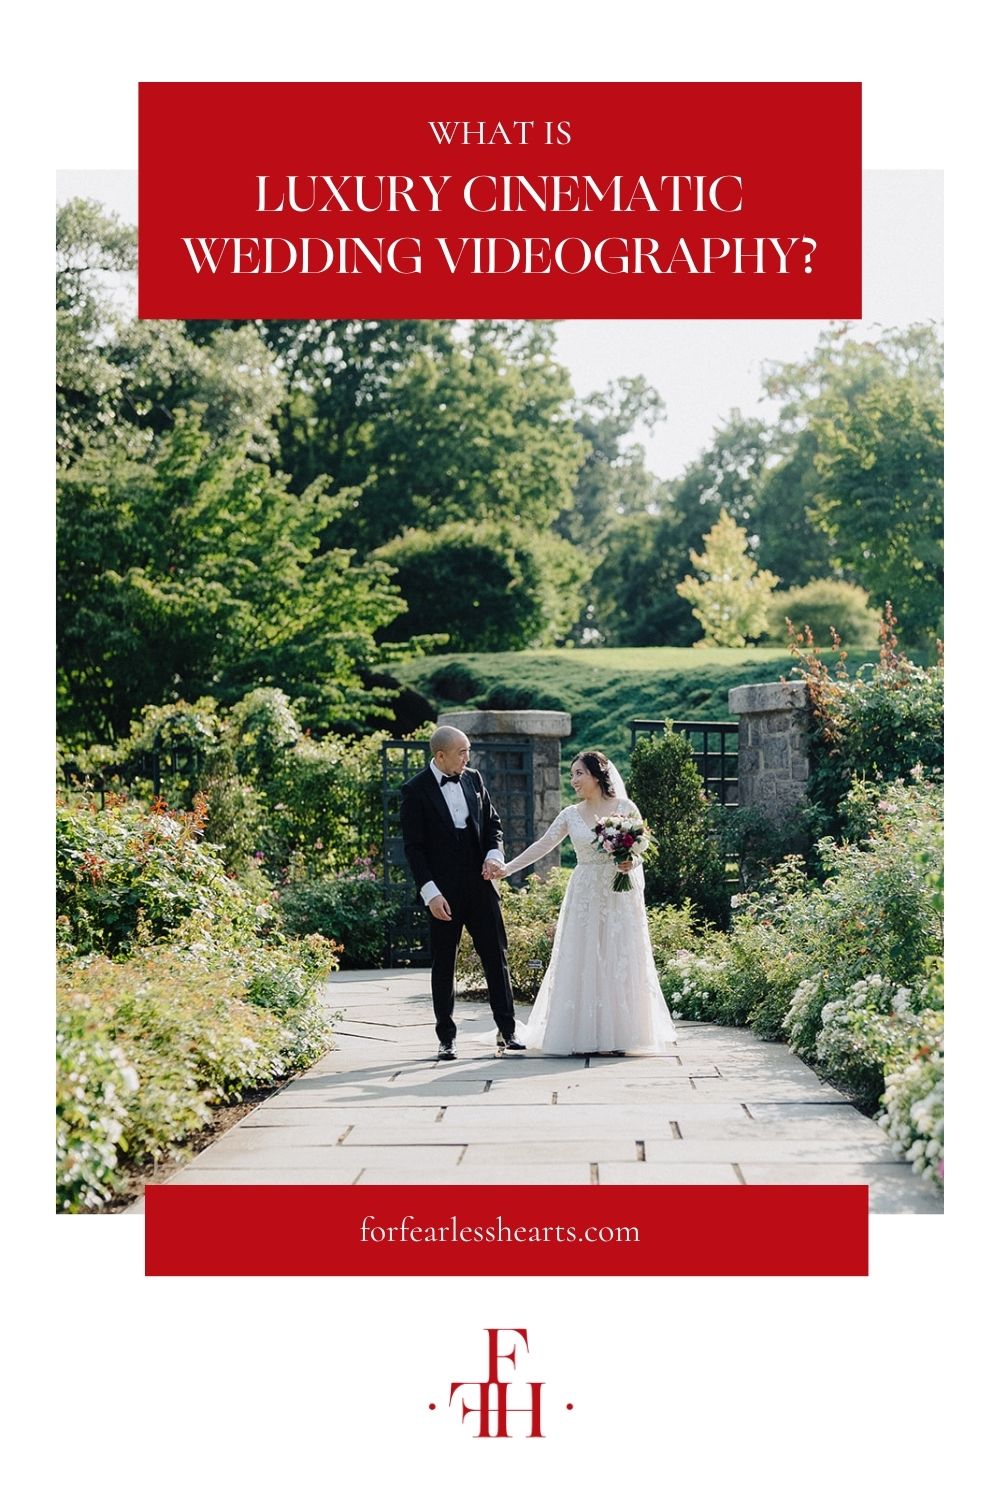 Newlywed couple holding hands in the middle of a garden; image overlaid with text that reads What is Luxury Cinematic Wedding Videography?